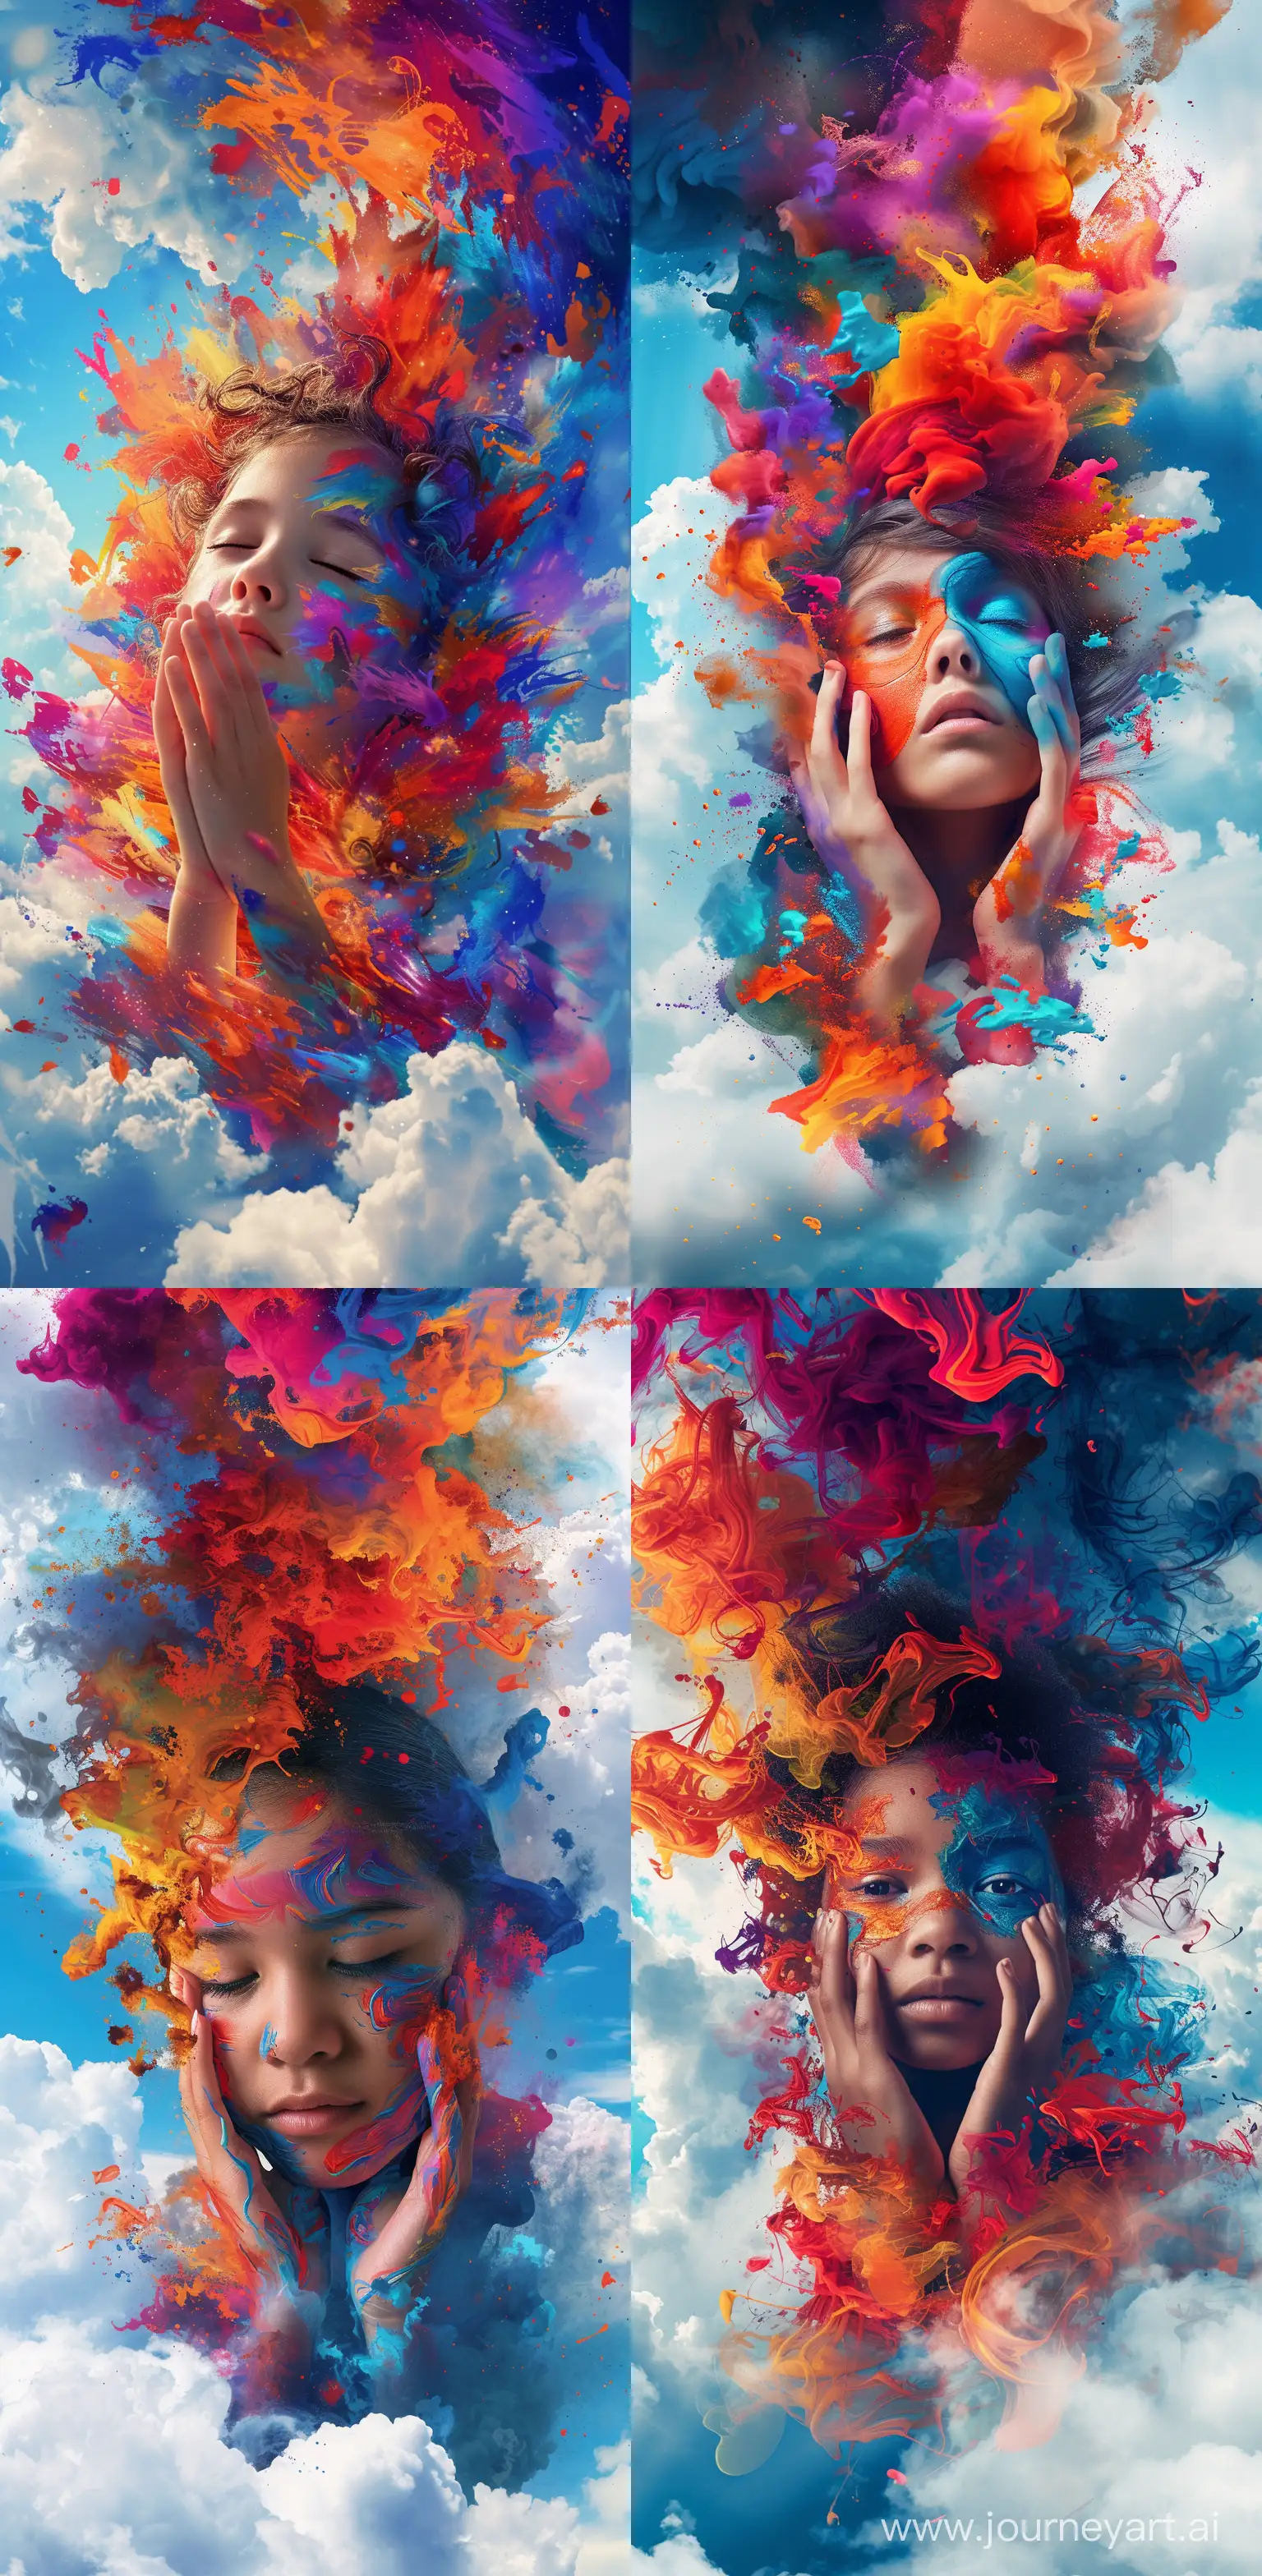 Vibrant-Digital-Portrait-of-a-Contemplative-Girl-Surrounded-by-Colorful-Hues